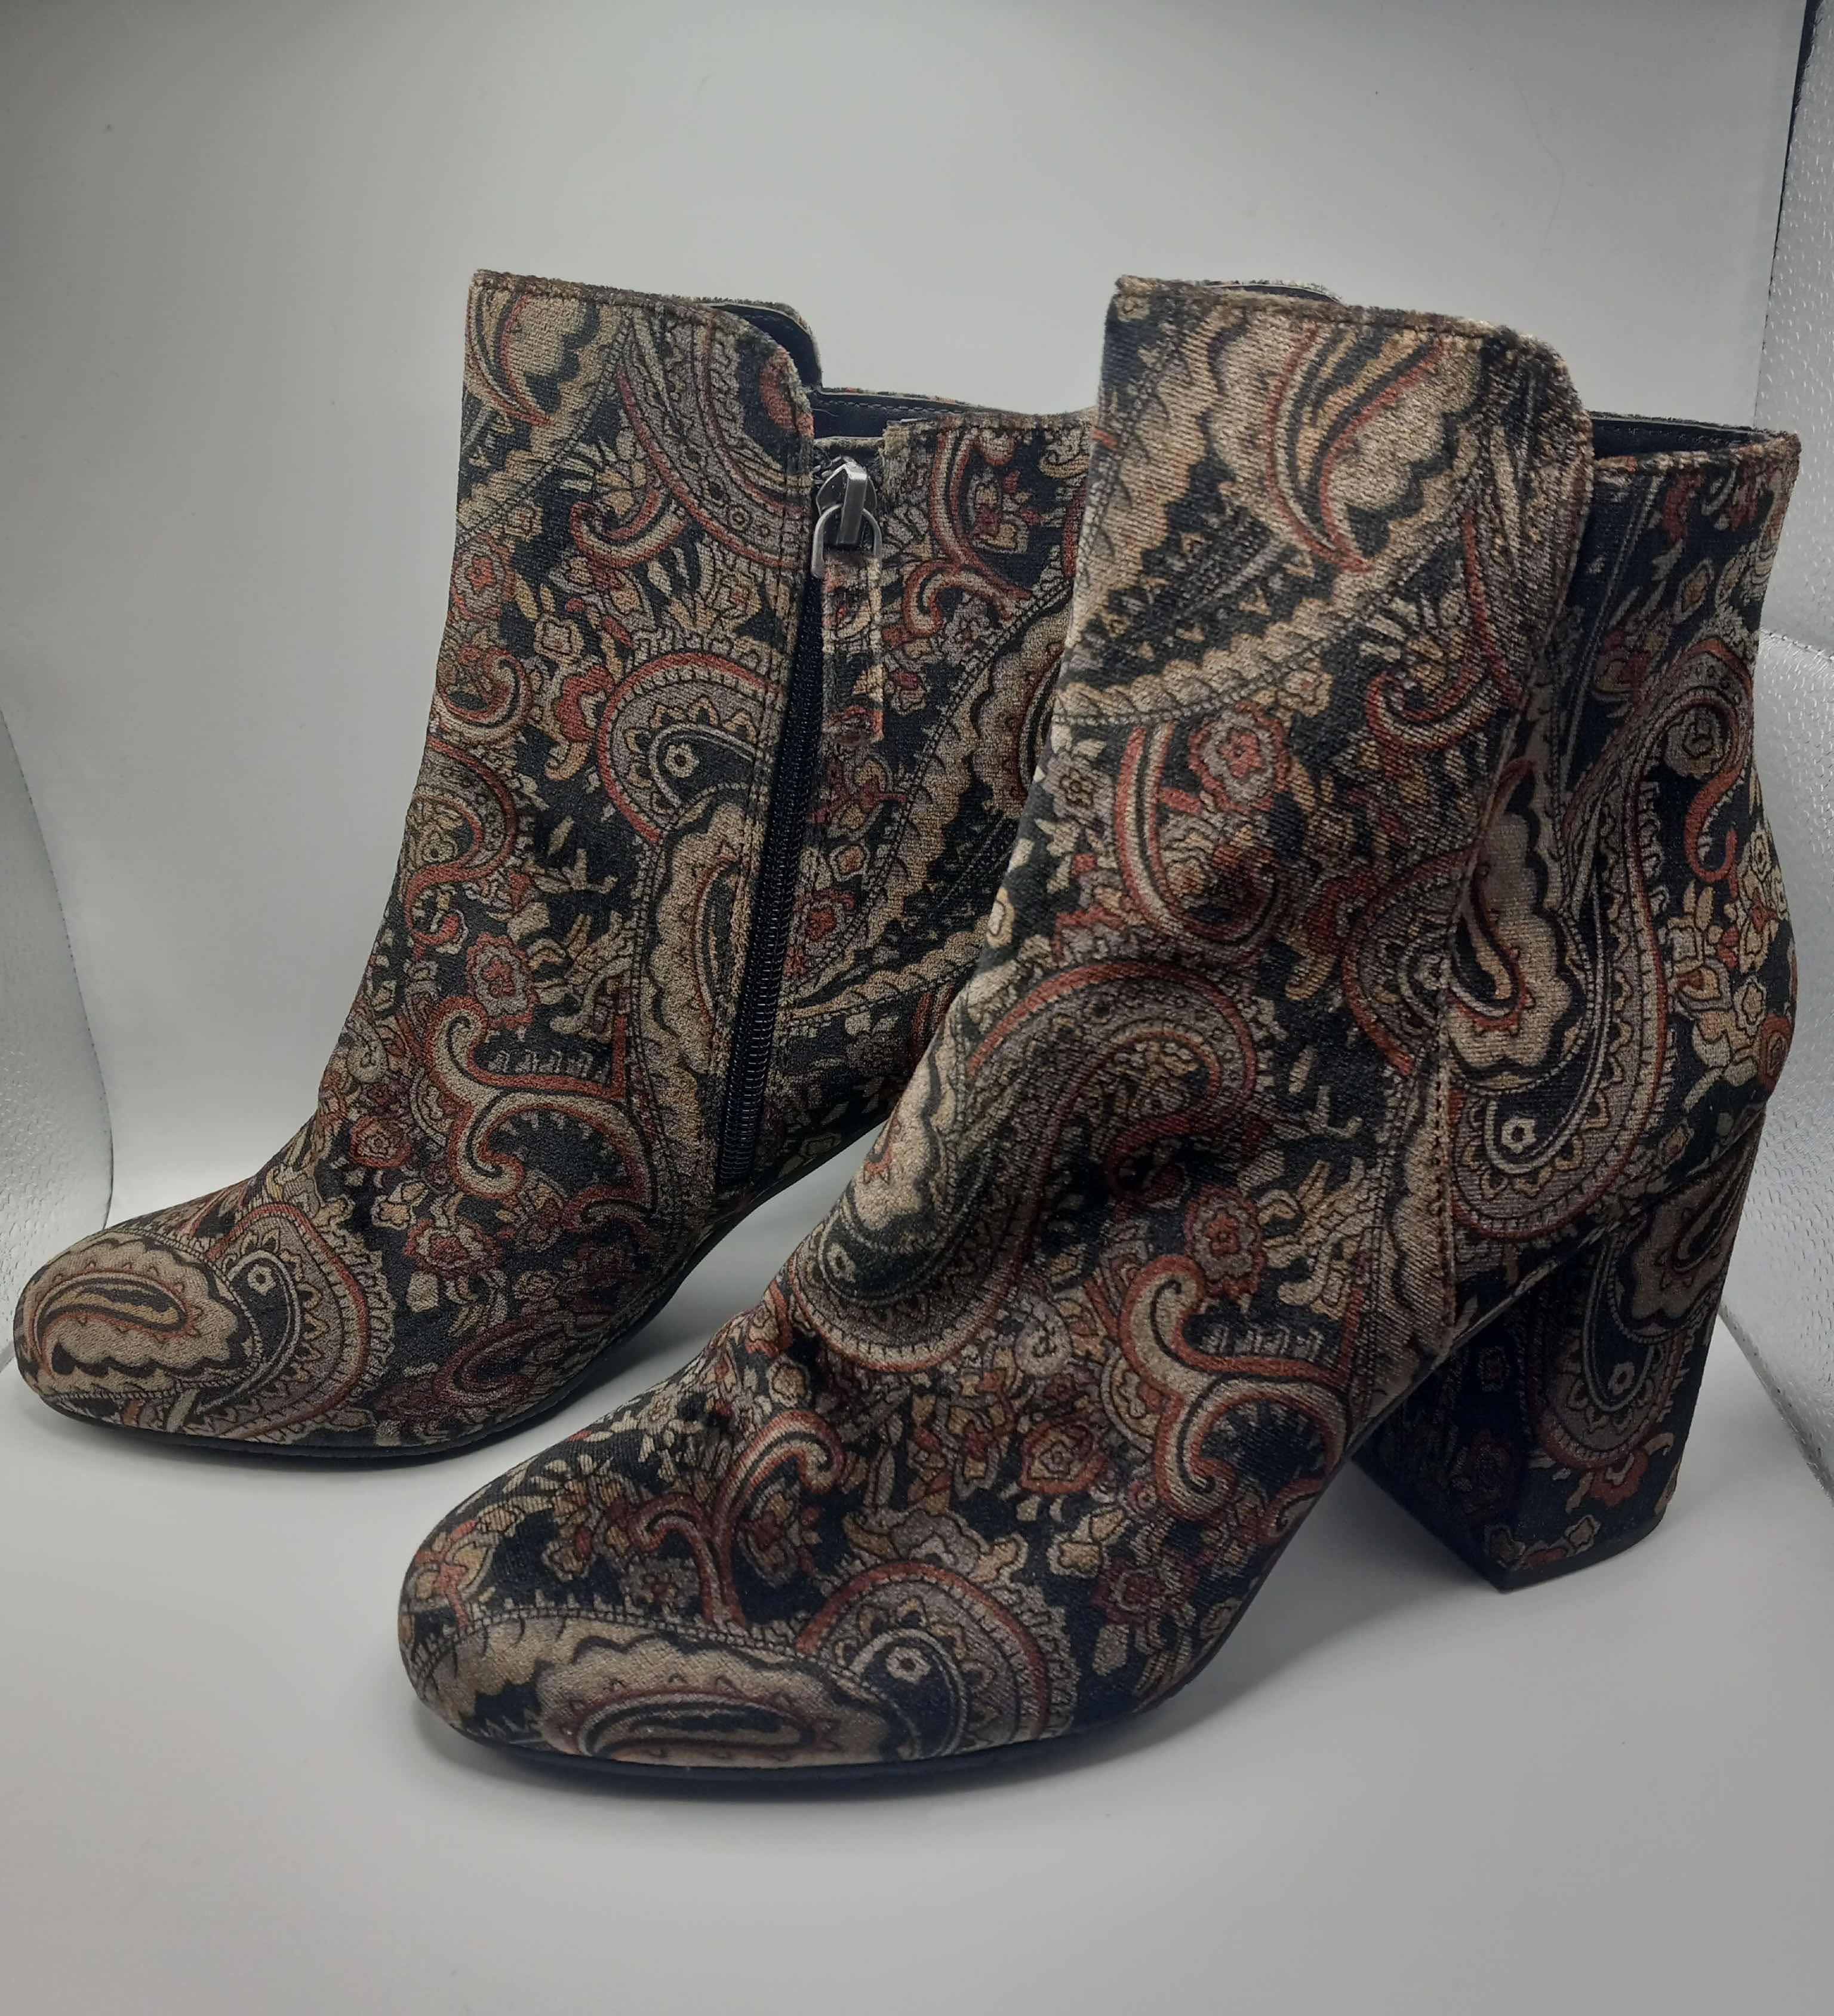 Photo 1 of BP KOLO PAISLEY VELVET FLATED BLOCK HEAL ANKLE BOOTS BOOTIES WOMEN’S SIZE 8.5